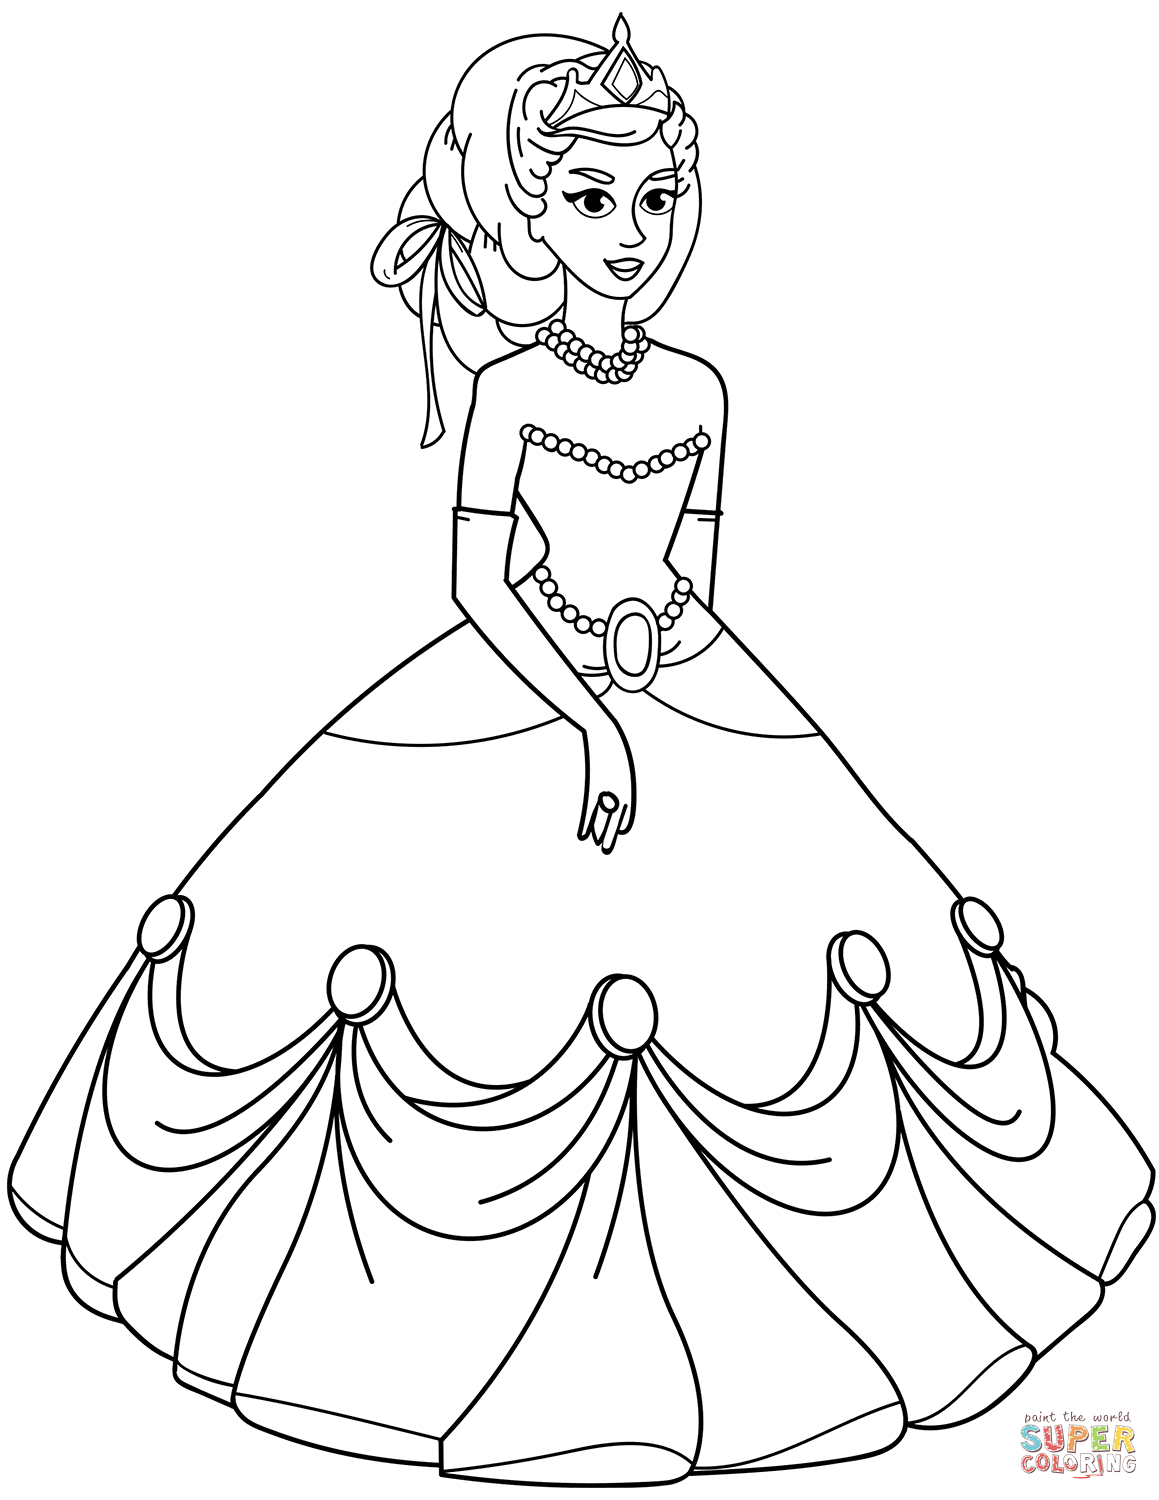 Princess in ball gown dress coloring page free printable coloring pages